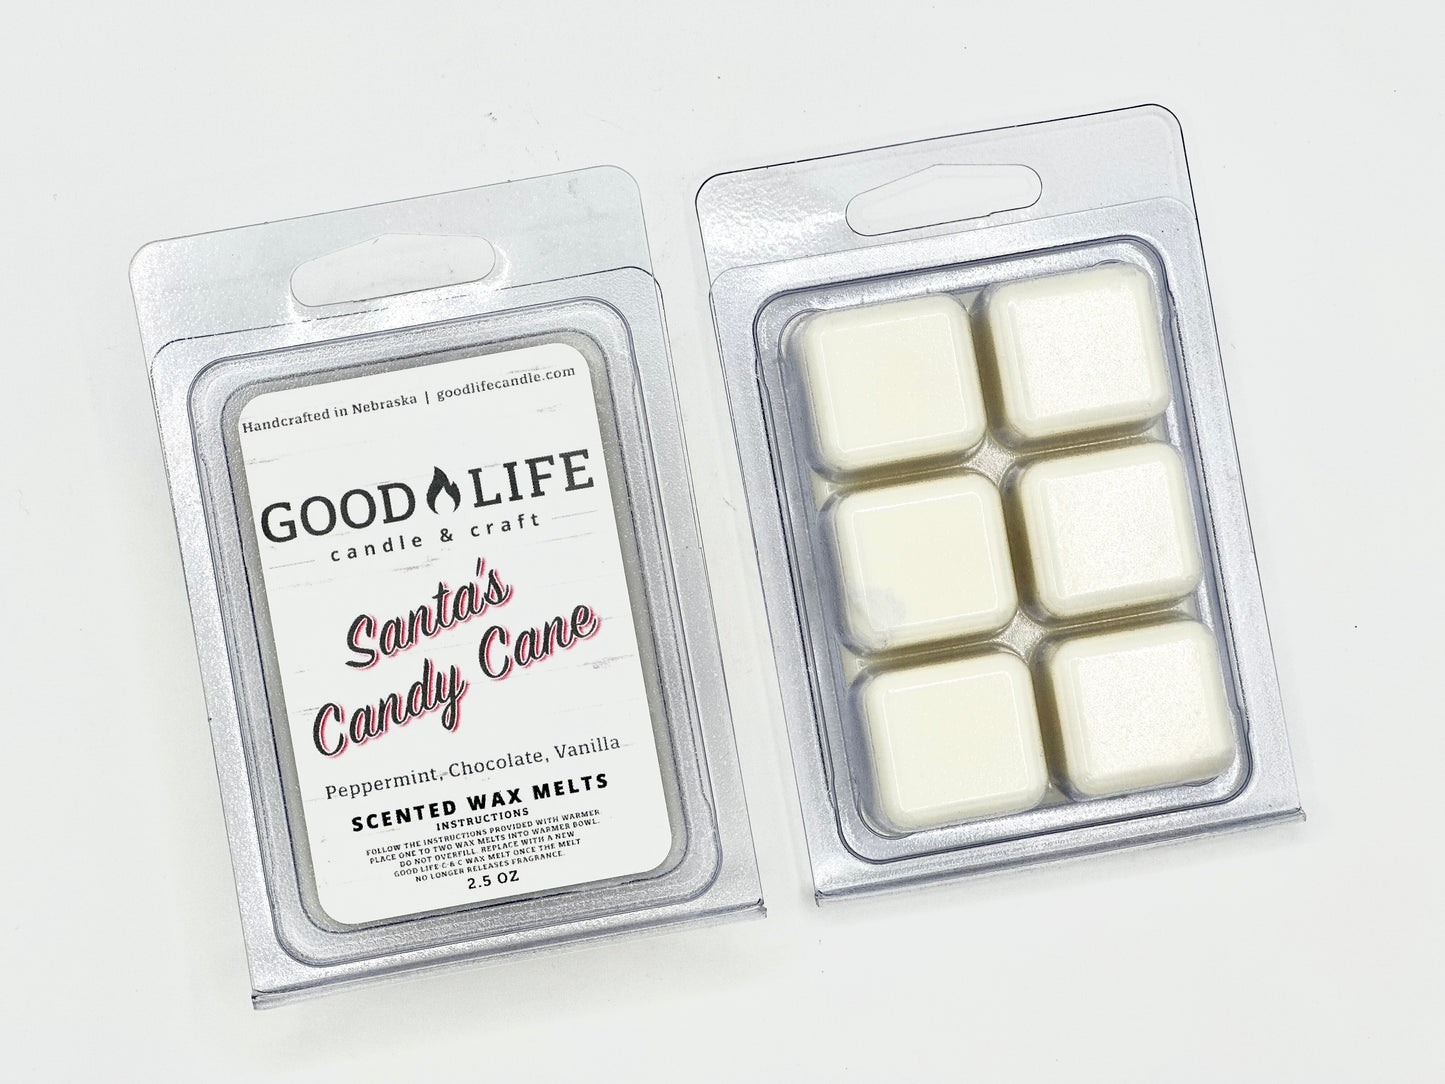 Santa's Candy Cane Scented Wax Melts